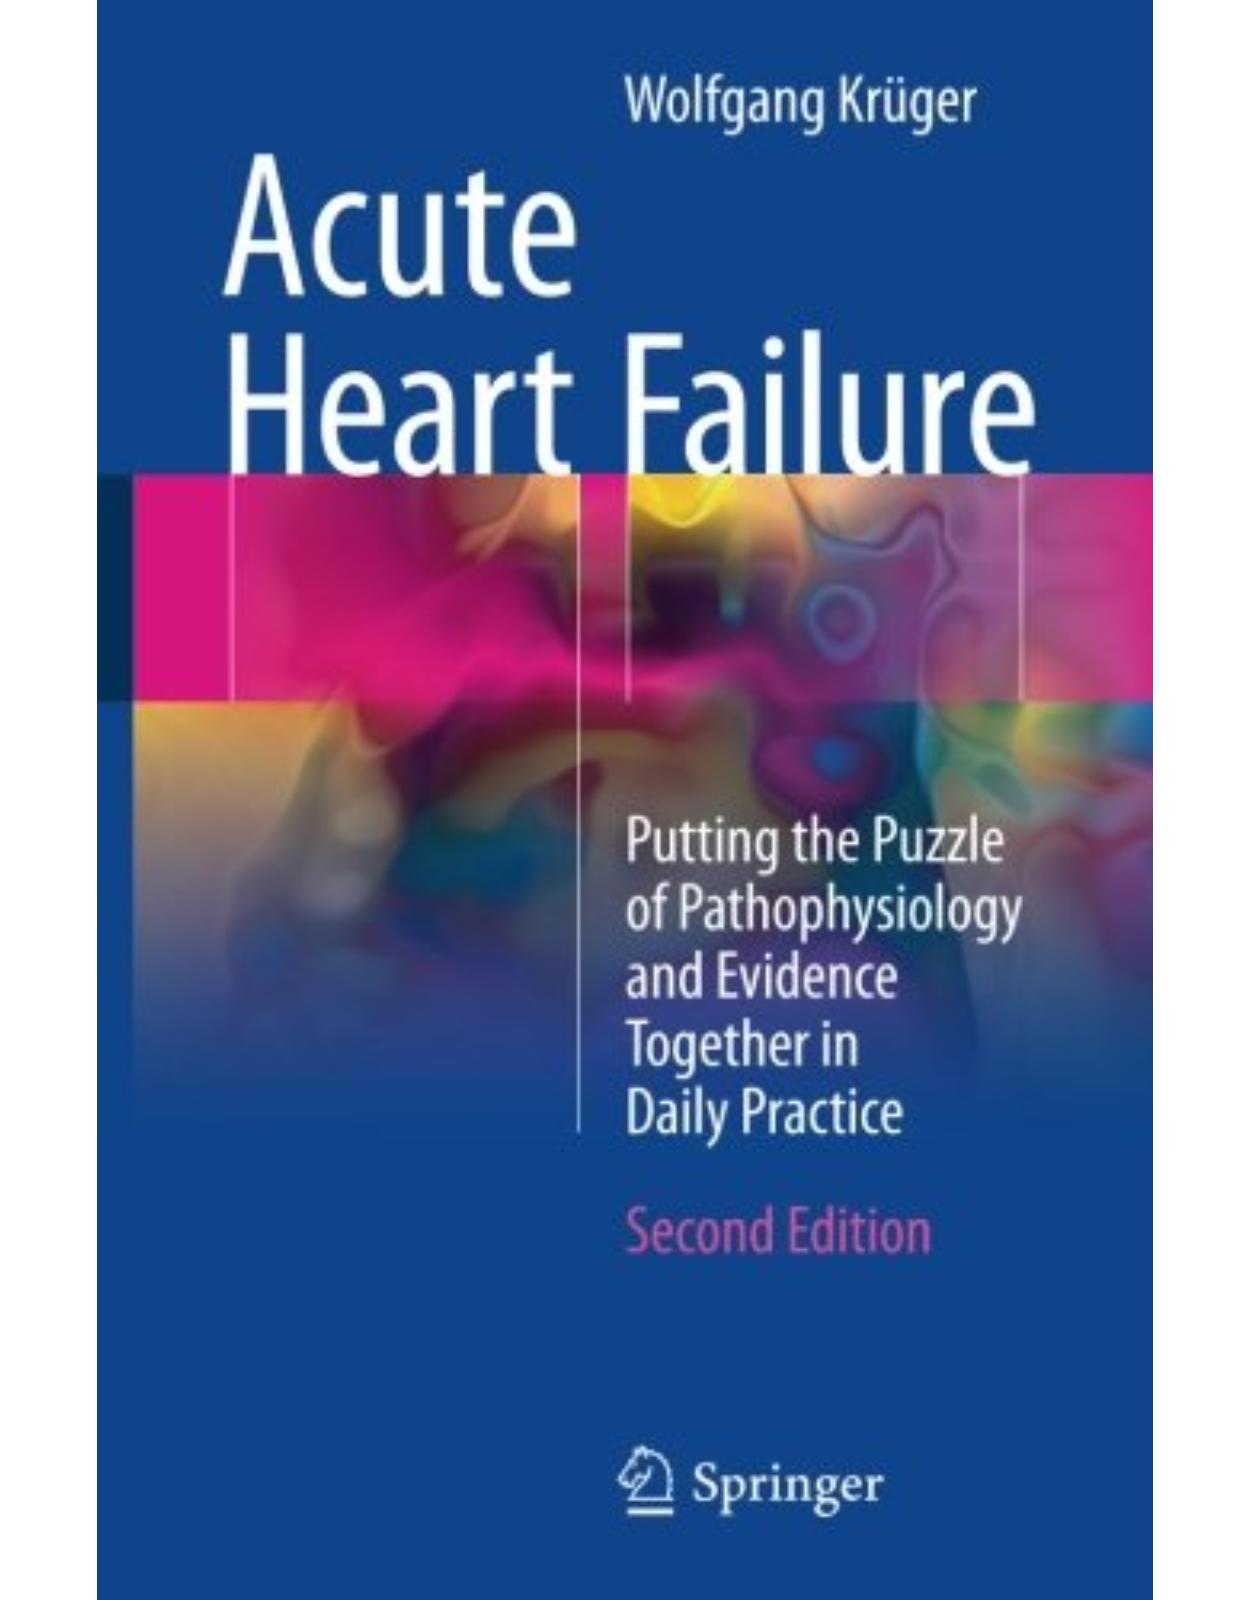 Acute Heart Failure: Putting the Puzzle of Pathophysiology and Evidence Together in Daily Practice 